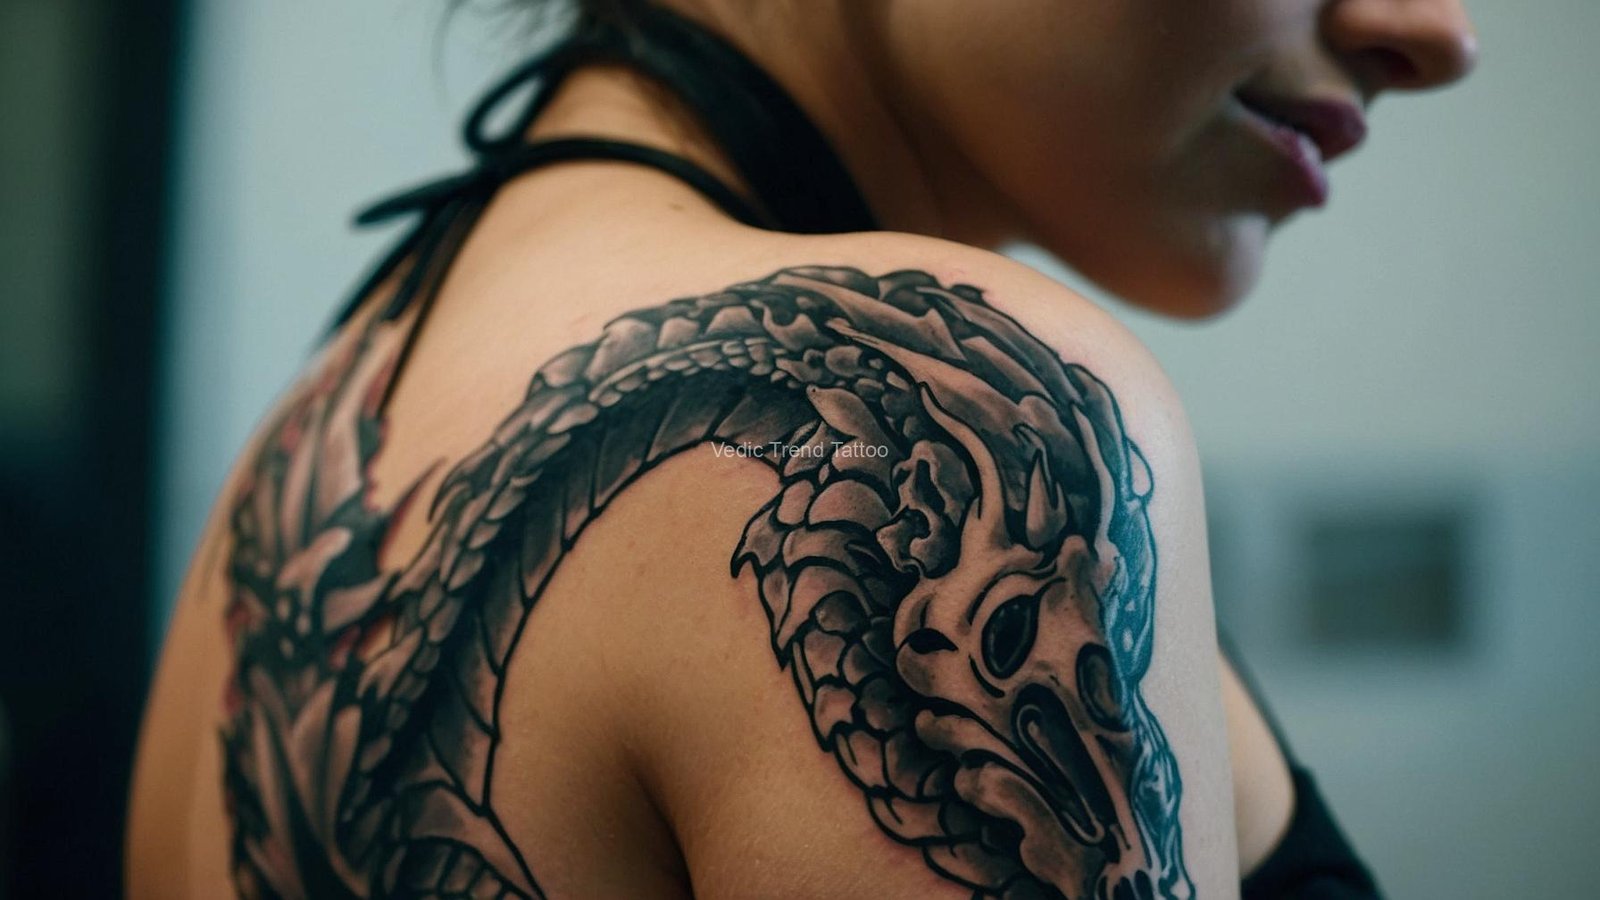 Dragon tattoo design on a girl's shoulder and back by Vedic Trend Tattoo